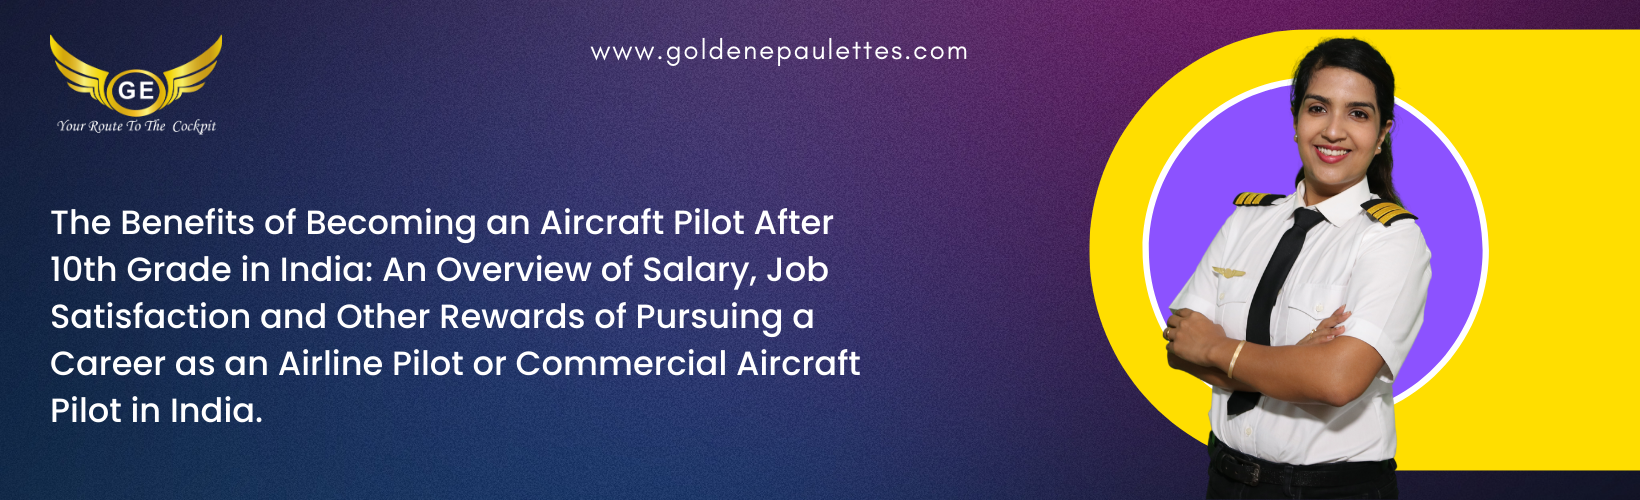 The Benefits of Becoming an Aircraft Pilot After 10th Grade in India